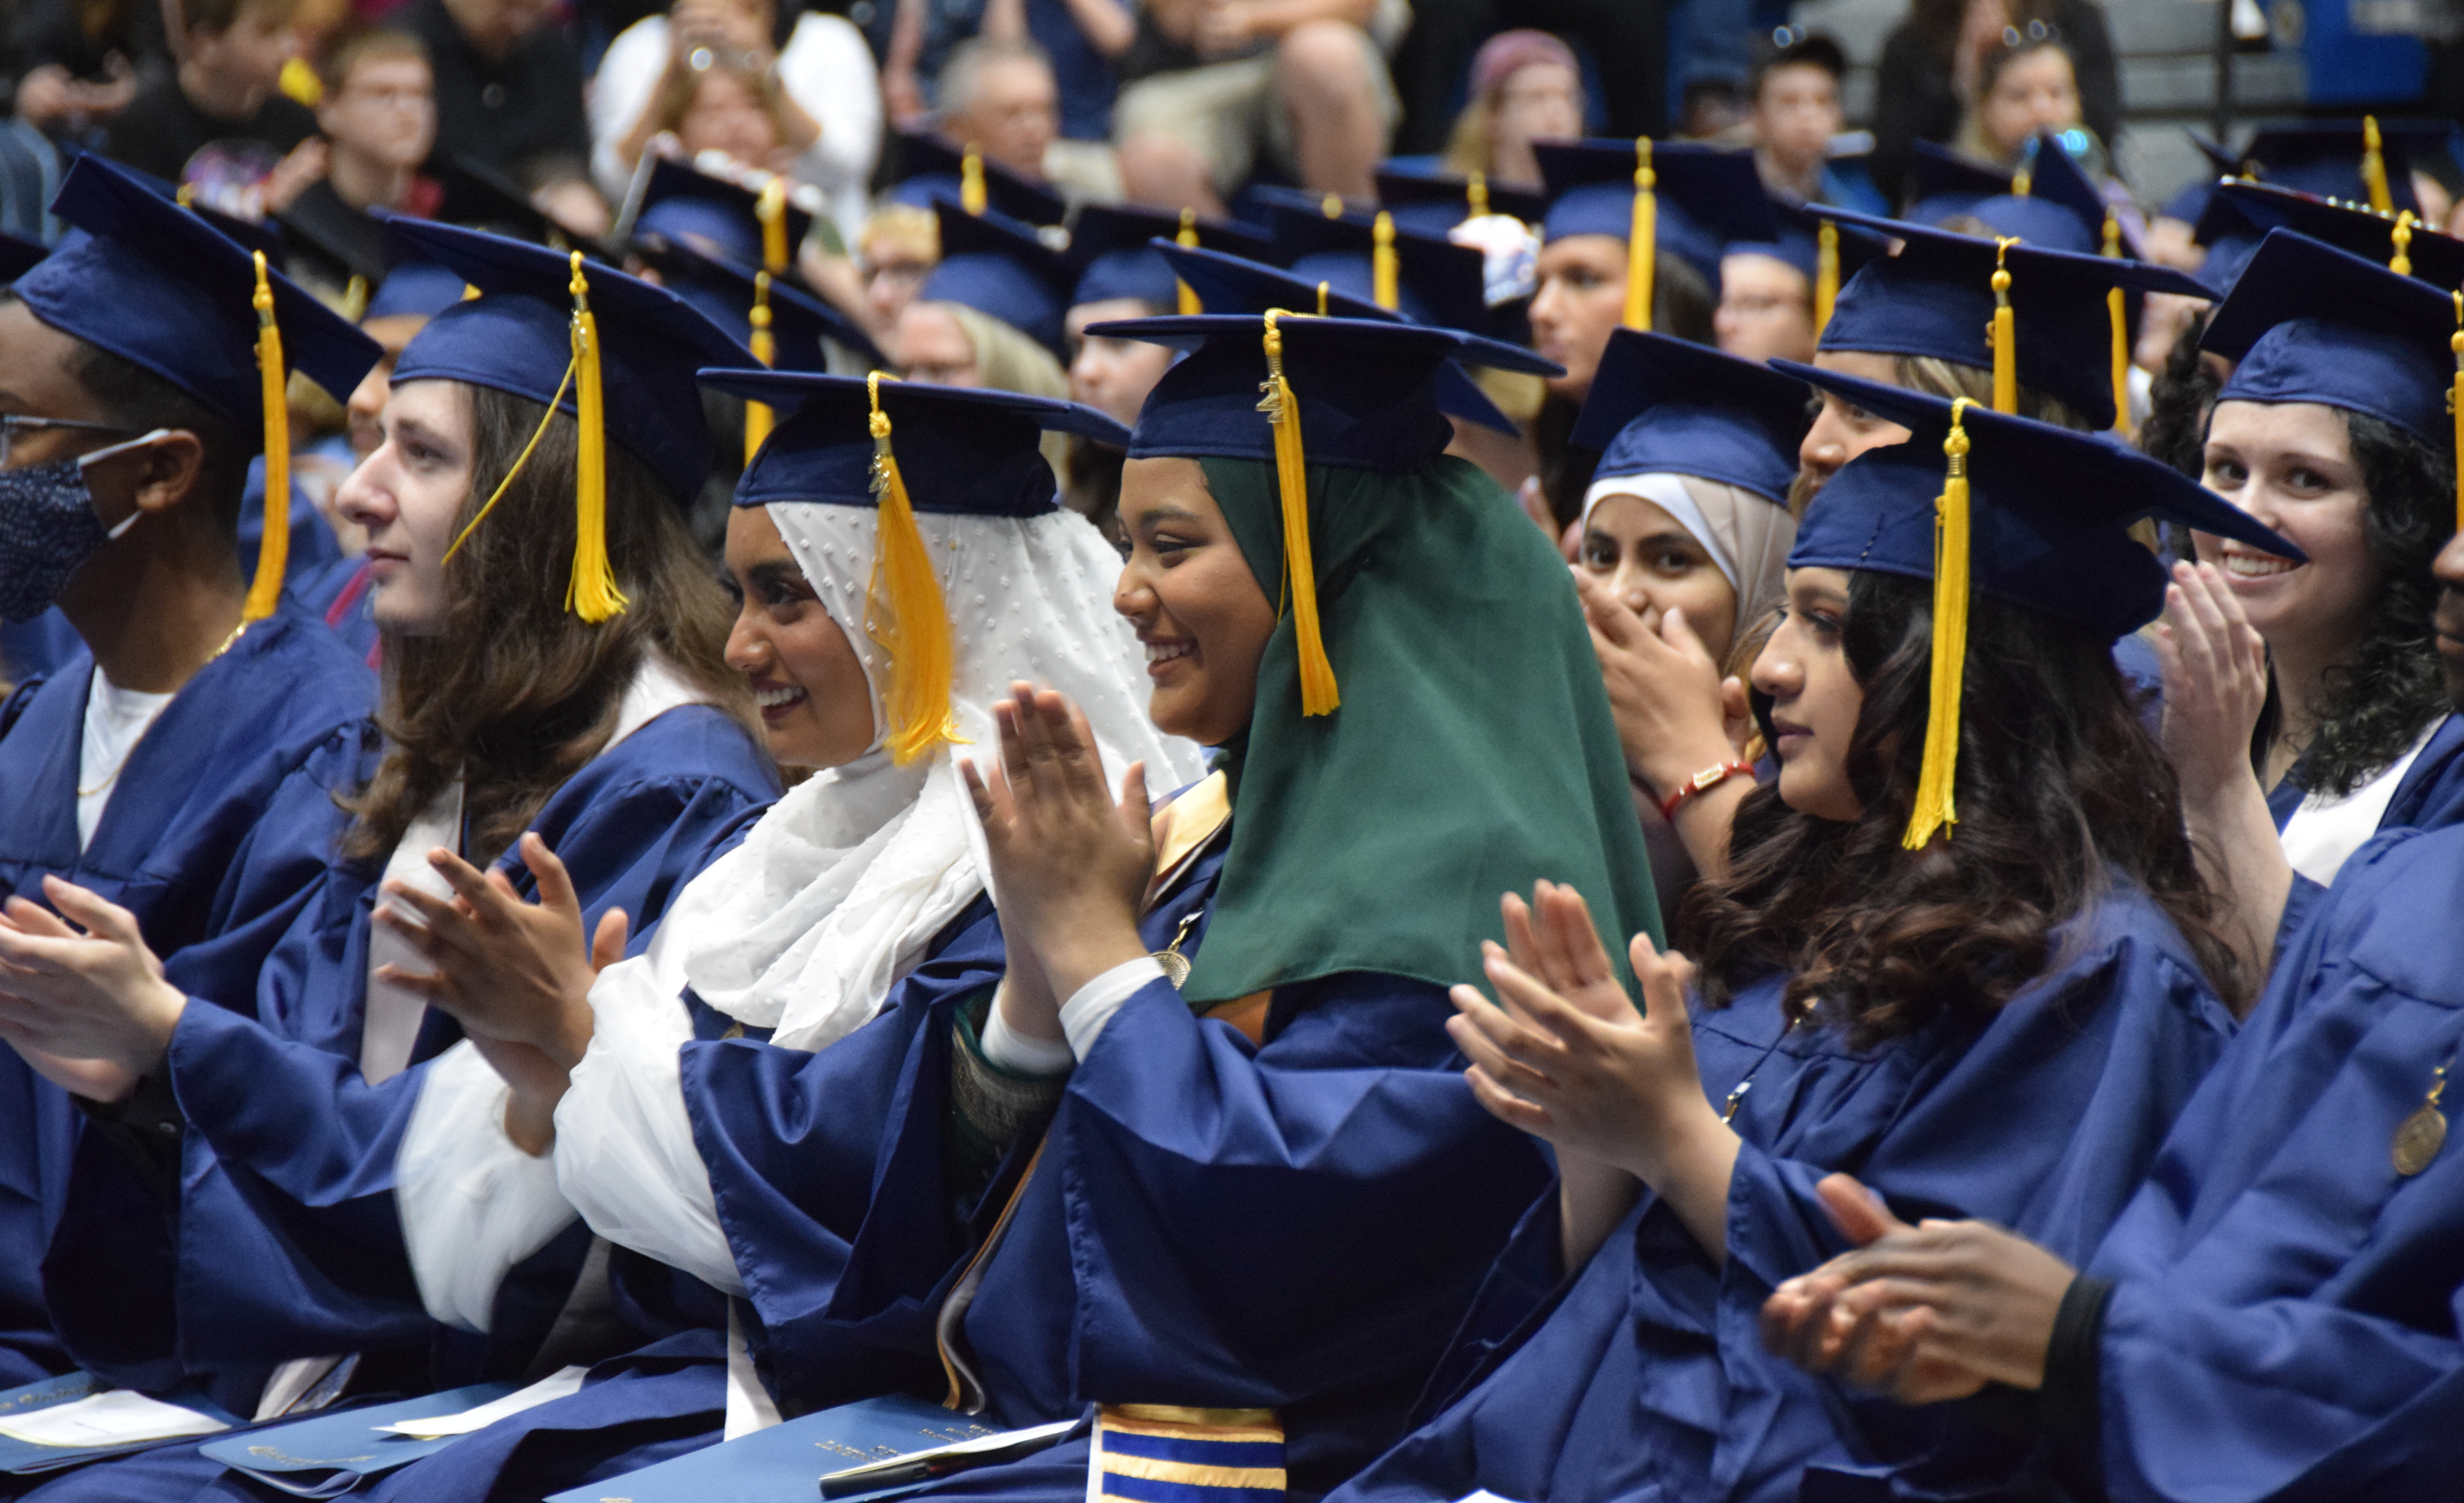 Class of 2022 VU graduates clapping and wearing caps and gowns during Spring 2022 Commencement at P.E. Complex